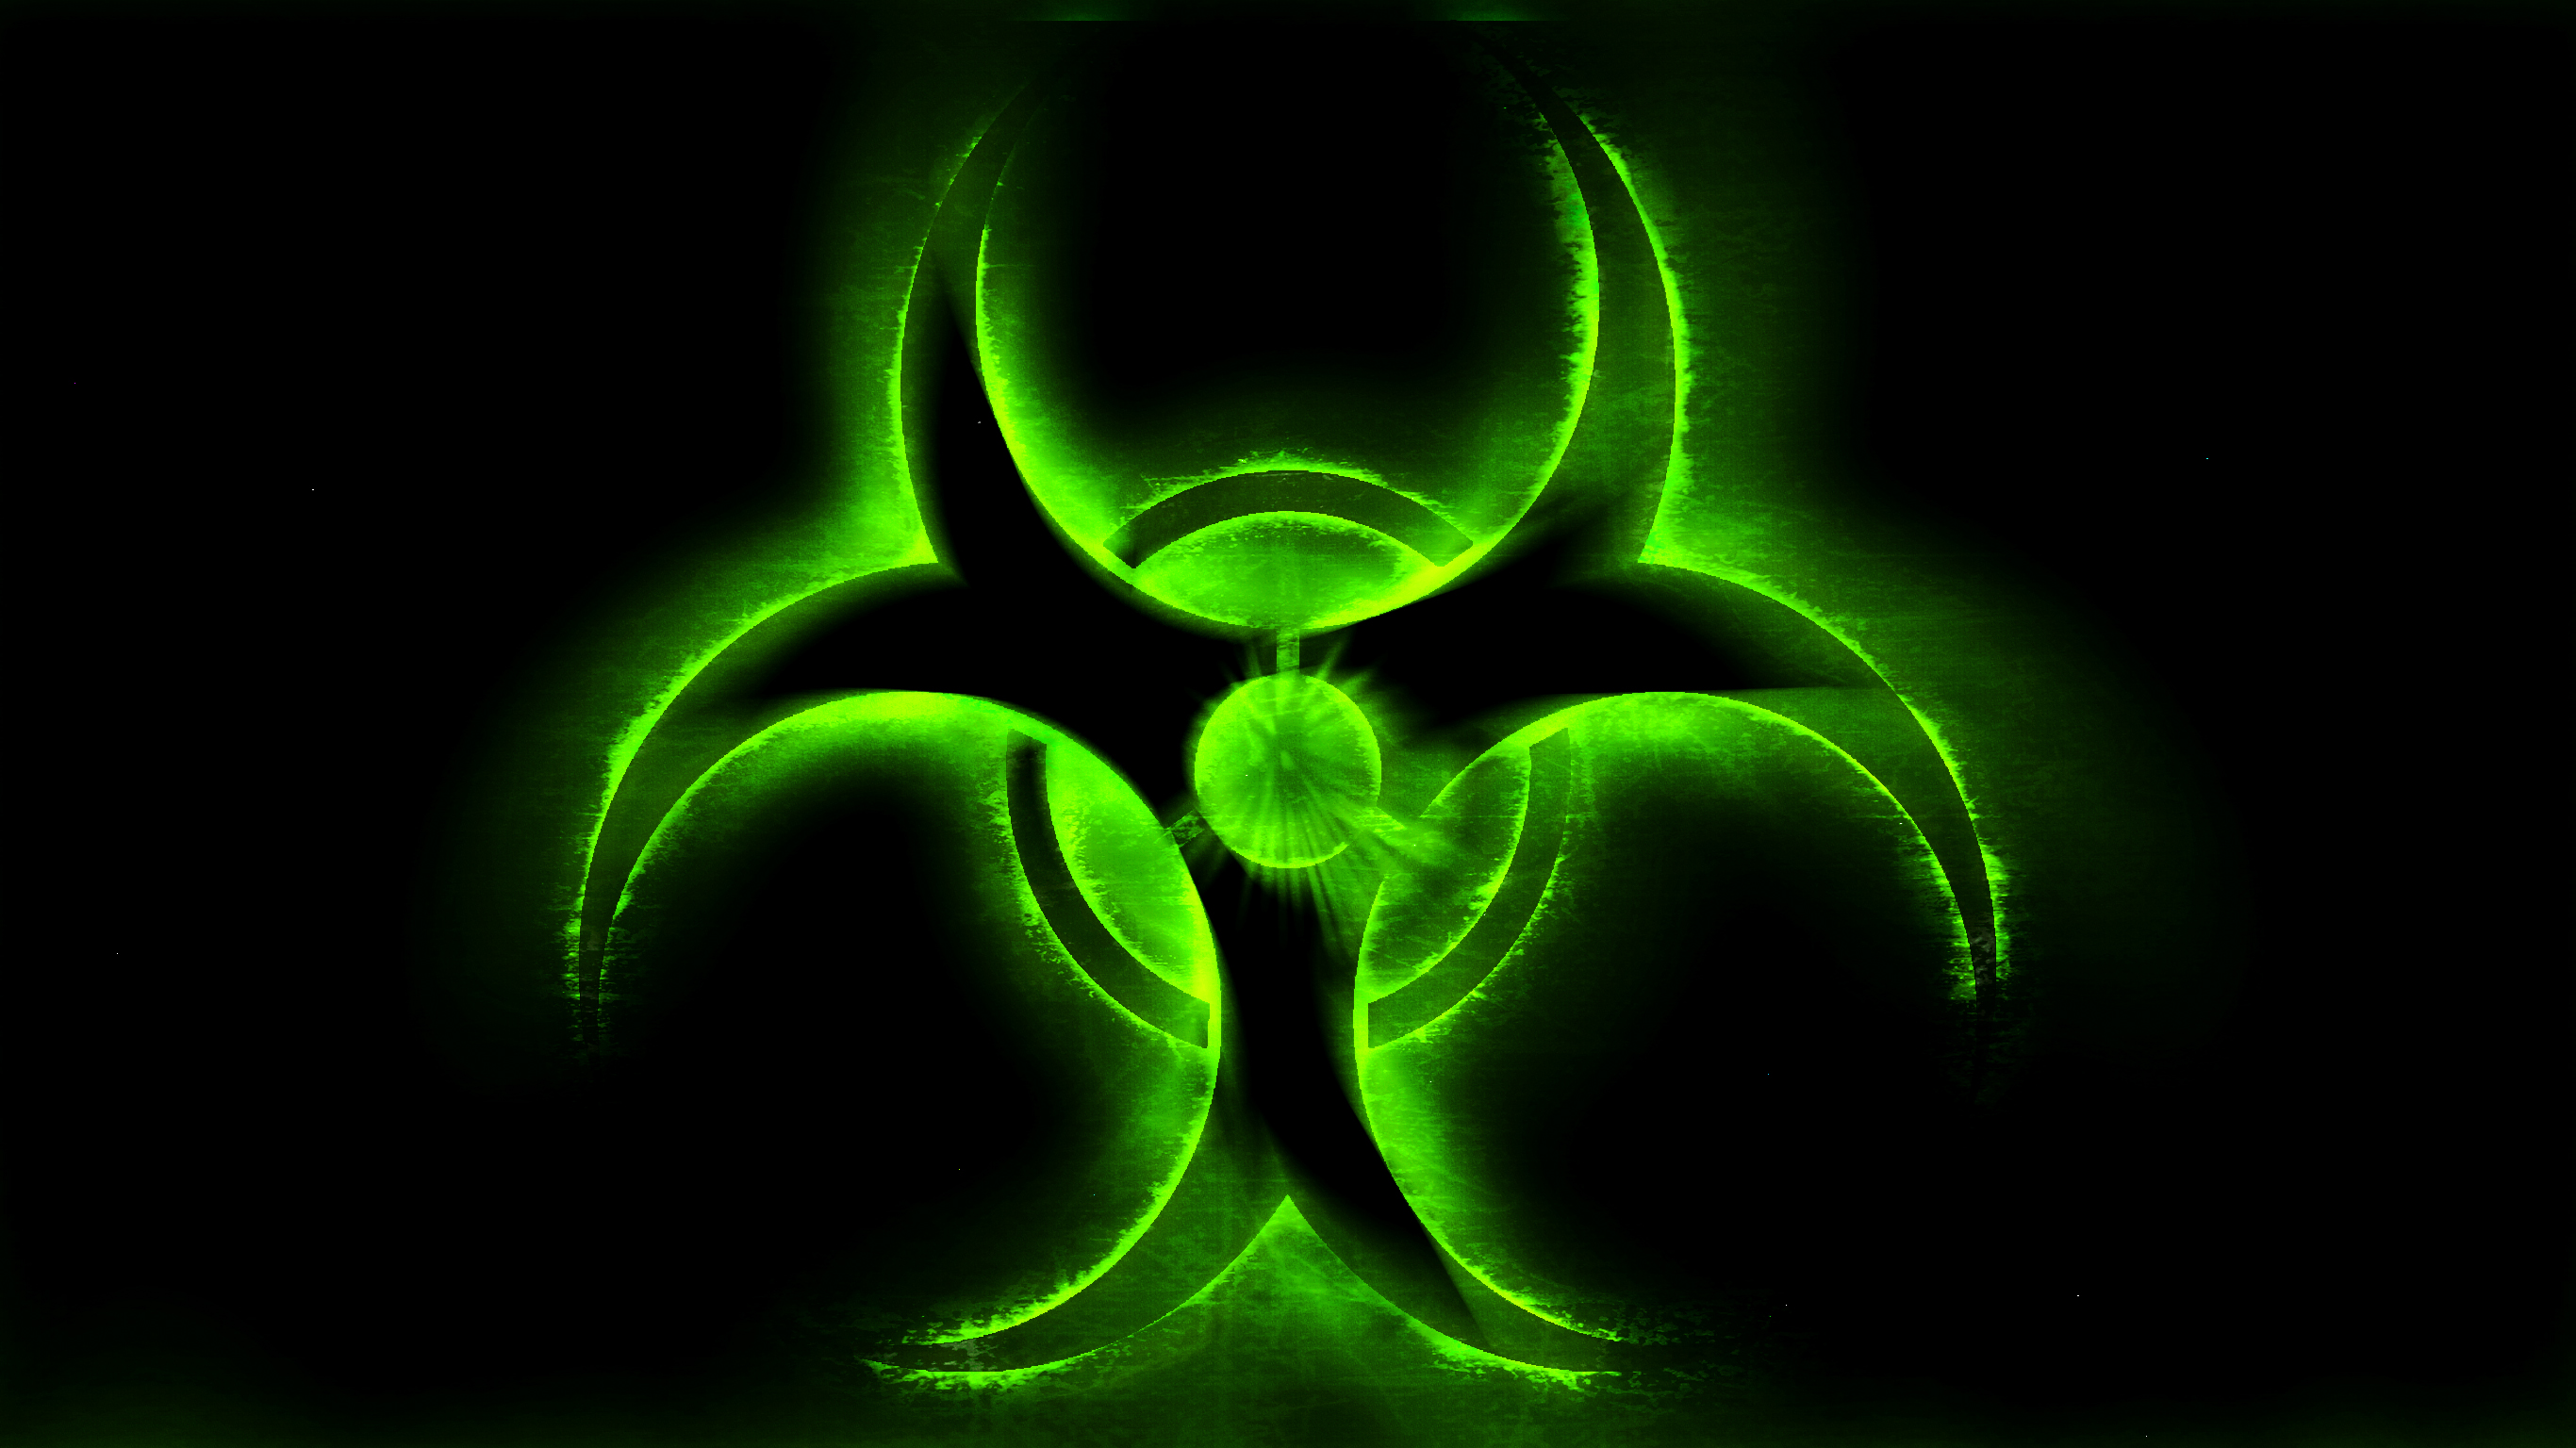 Biohazard Toxic Green By Space Project712